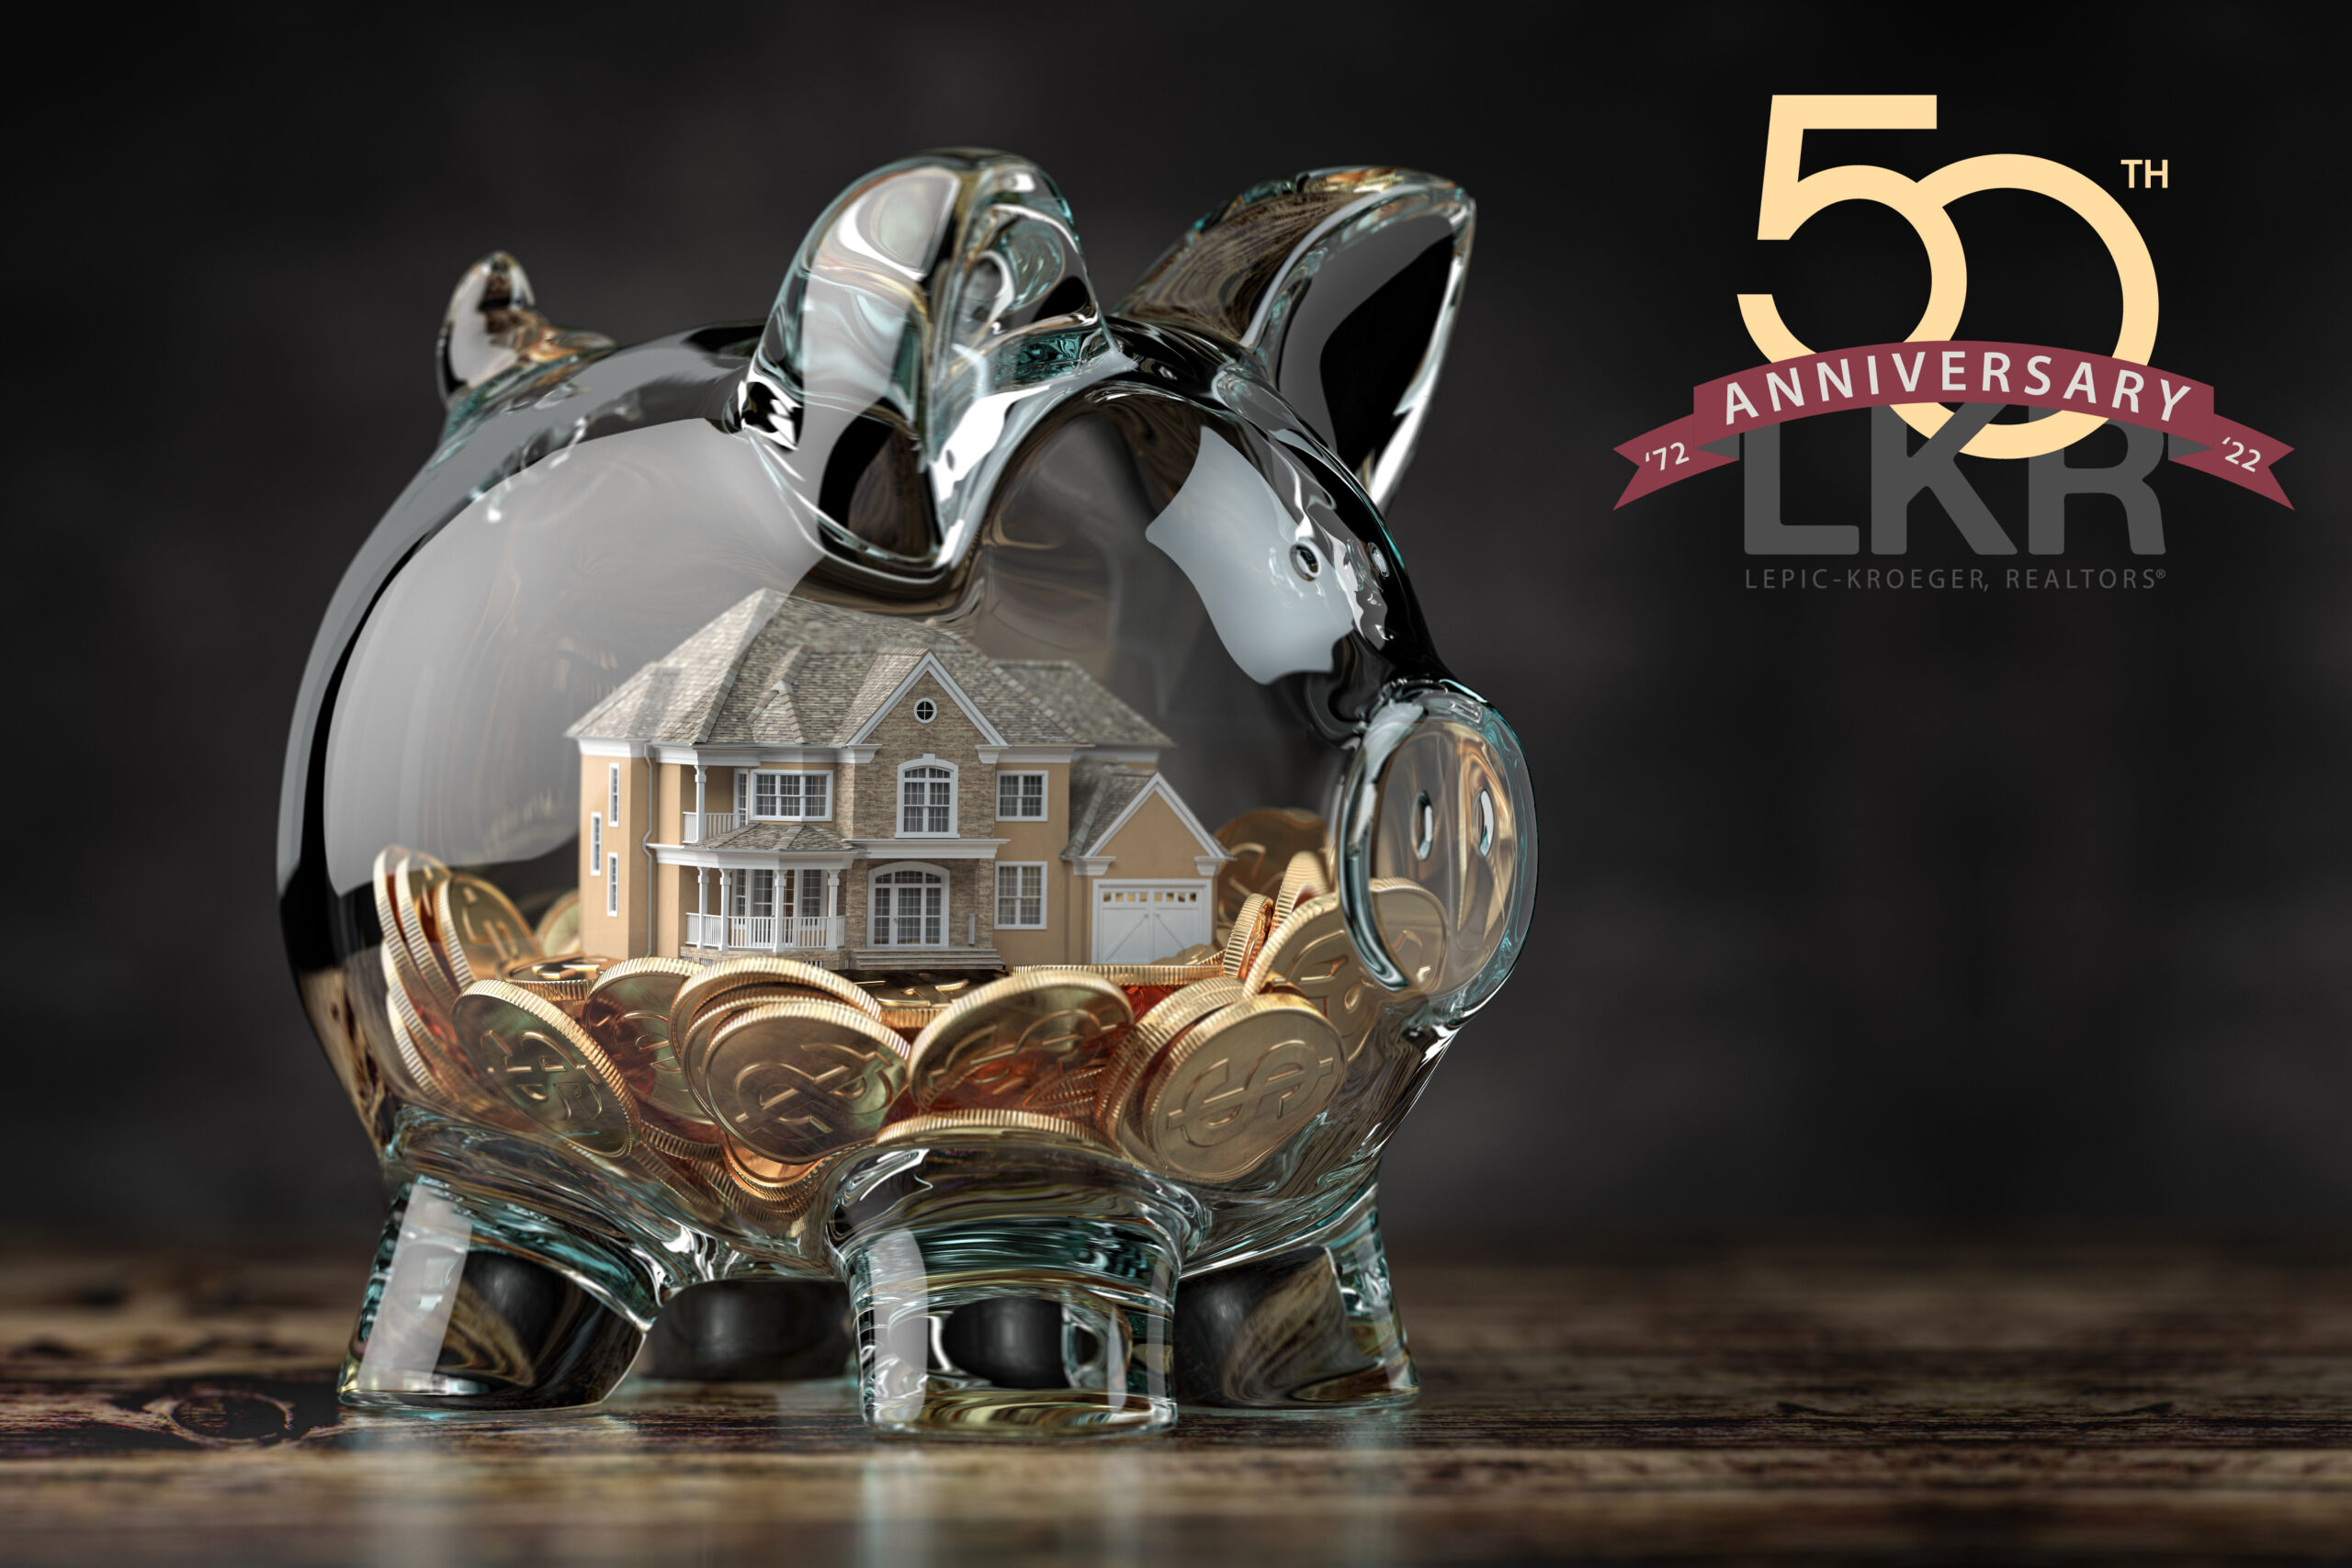 Feature Photo - Glass Piggy Bank with LKR 50th Anniversary Logo